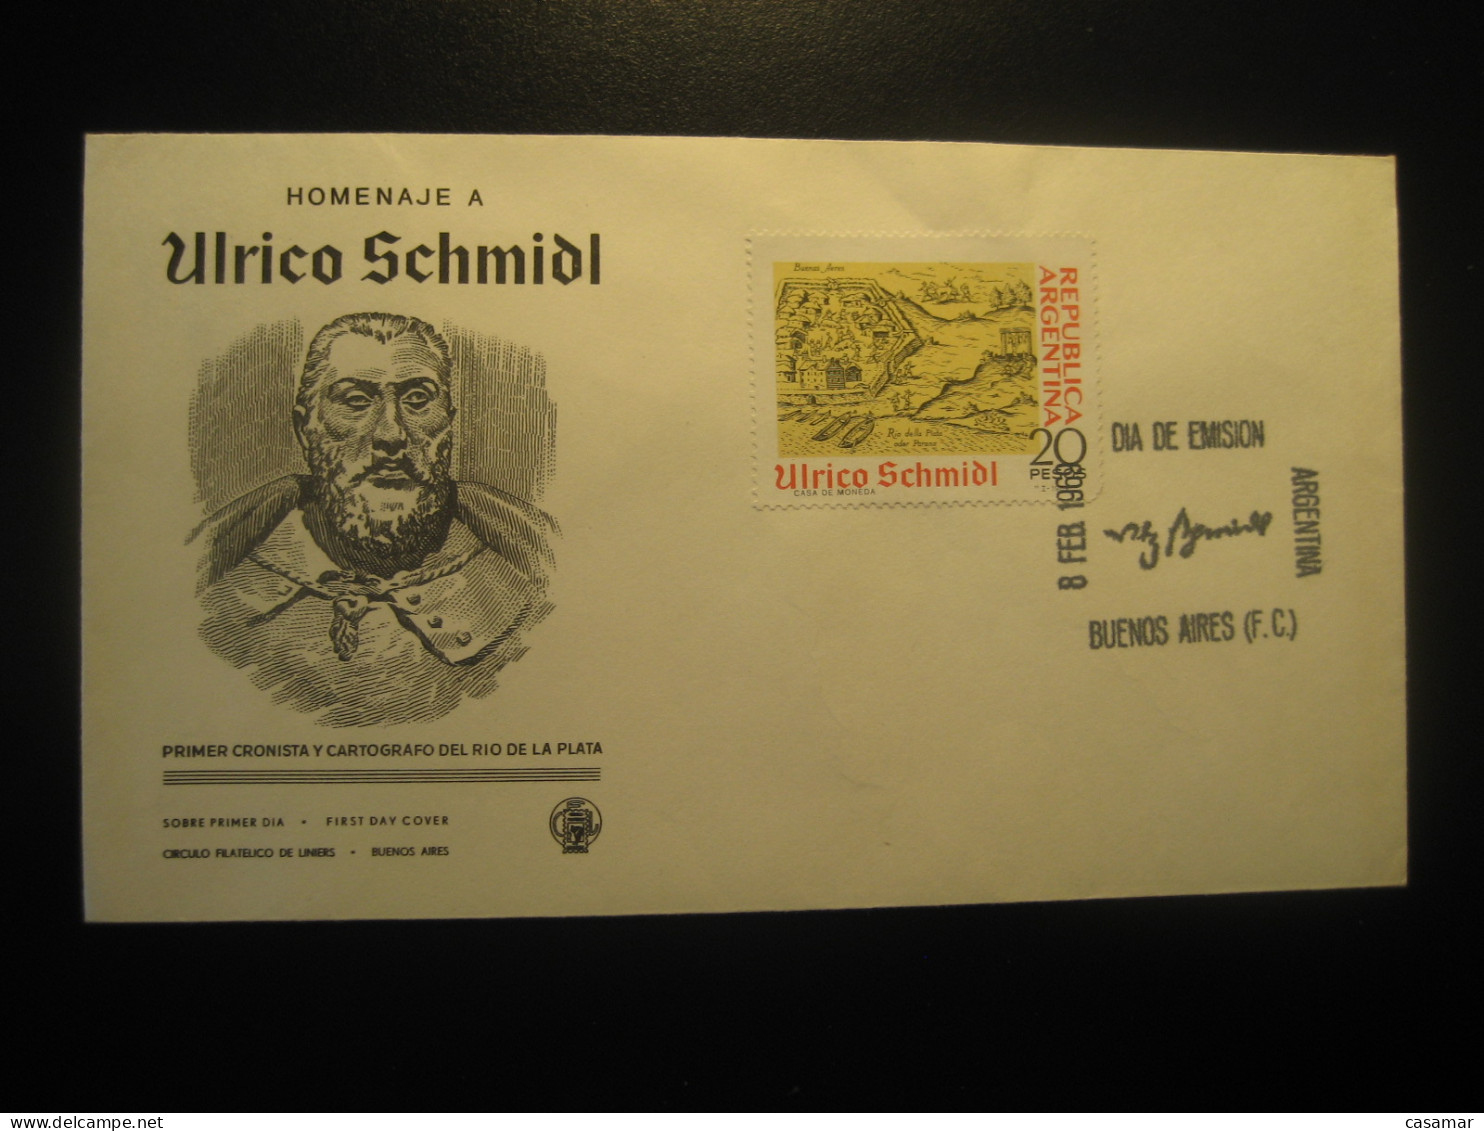 1969 Ulrico Schmidl Cartografo Cartography Cartographie Mapping Geography FDC Cancel Cover ARGENTINA Buenos Aires - Aardrijkskunde